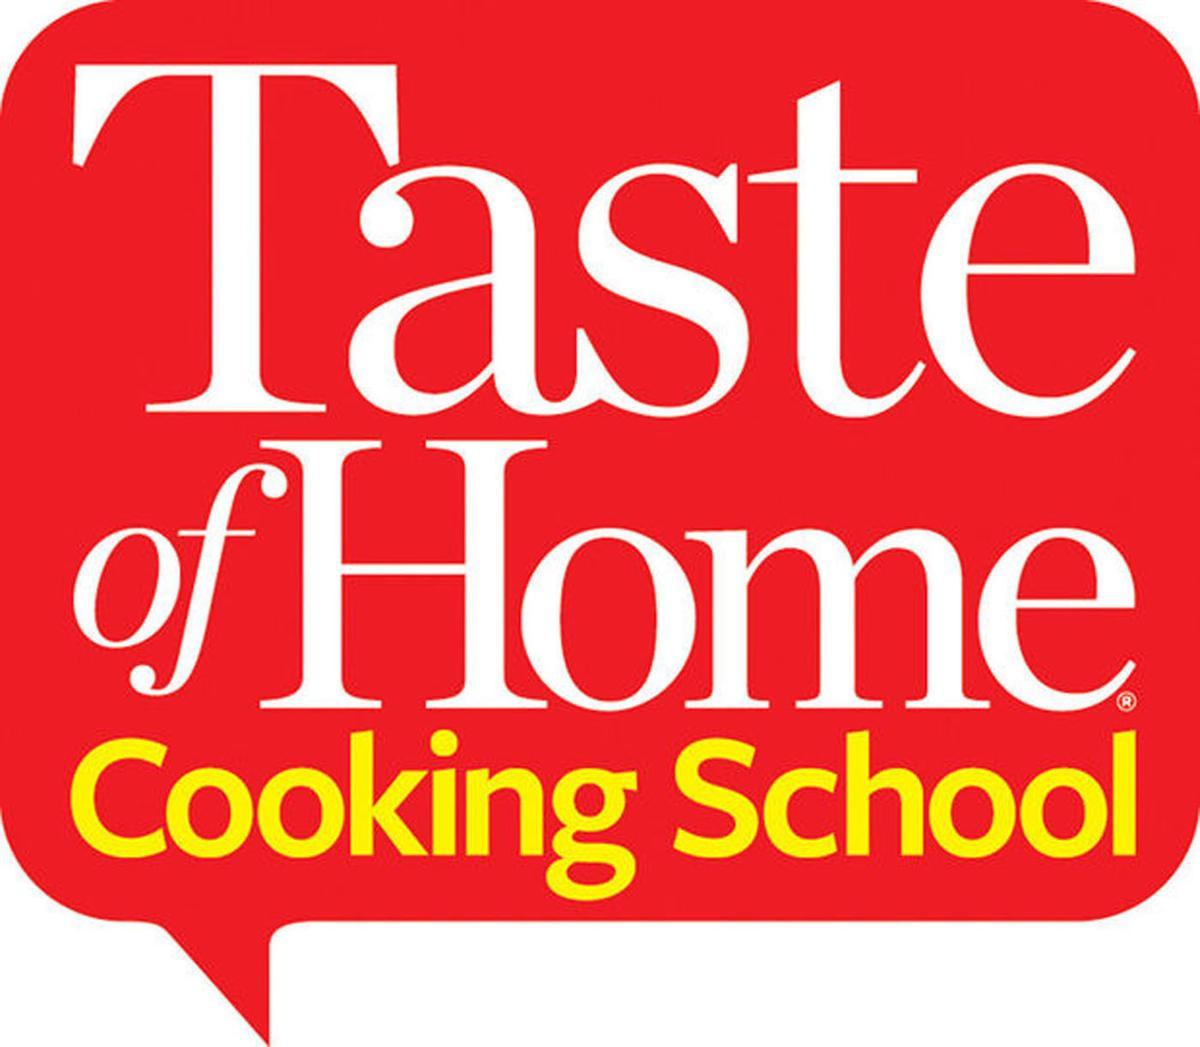 Tasteofhome.com Logo - Taste of Home Cooking School to dish up good fun, food, prizes ...